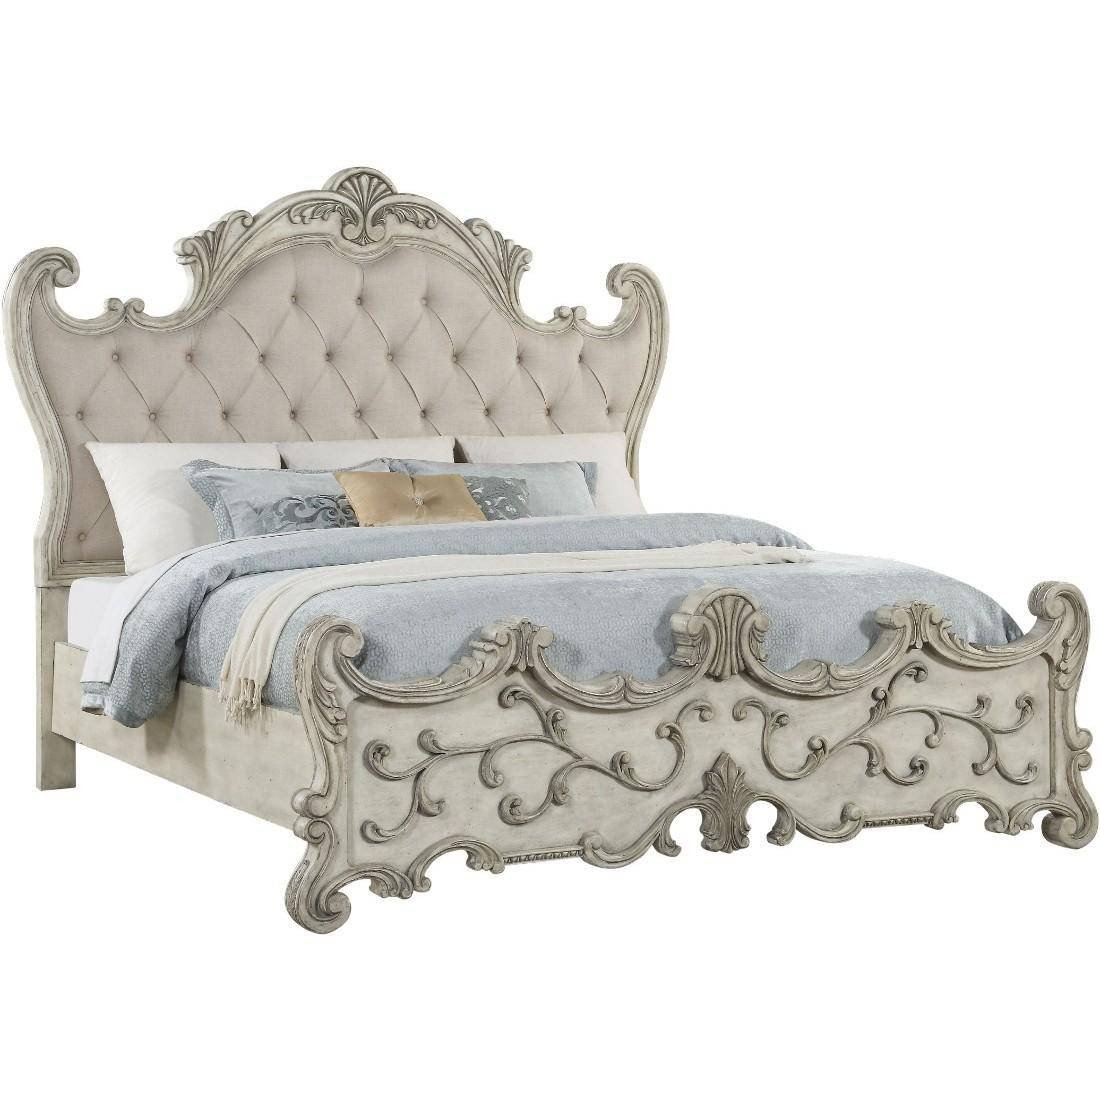 White Bedroom Furniture Set Lovely Luxury King Bedroom Set 5p W Chest Antique White Fabric